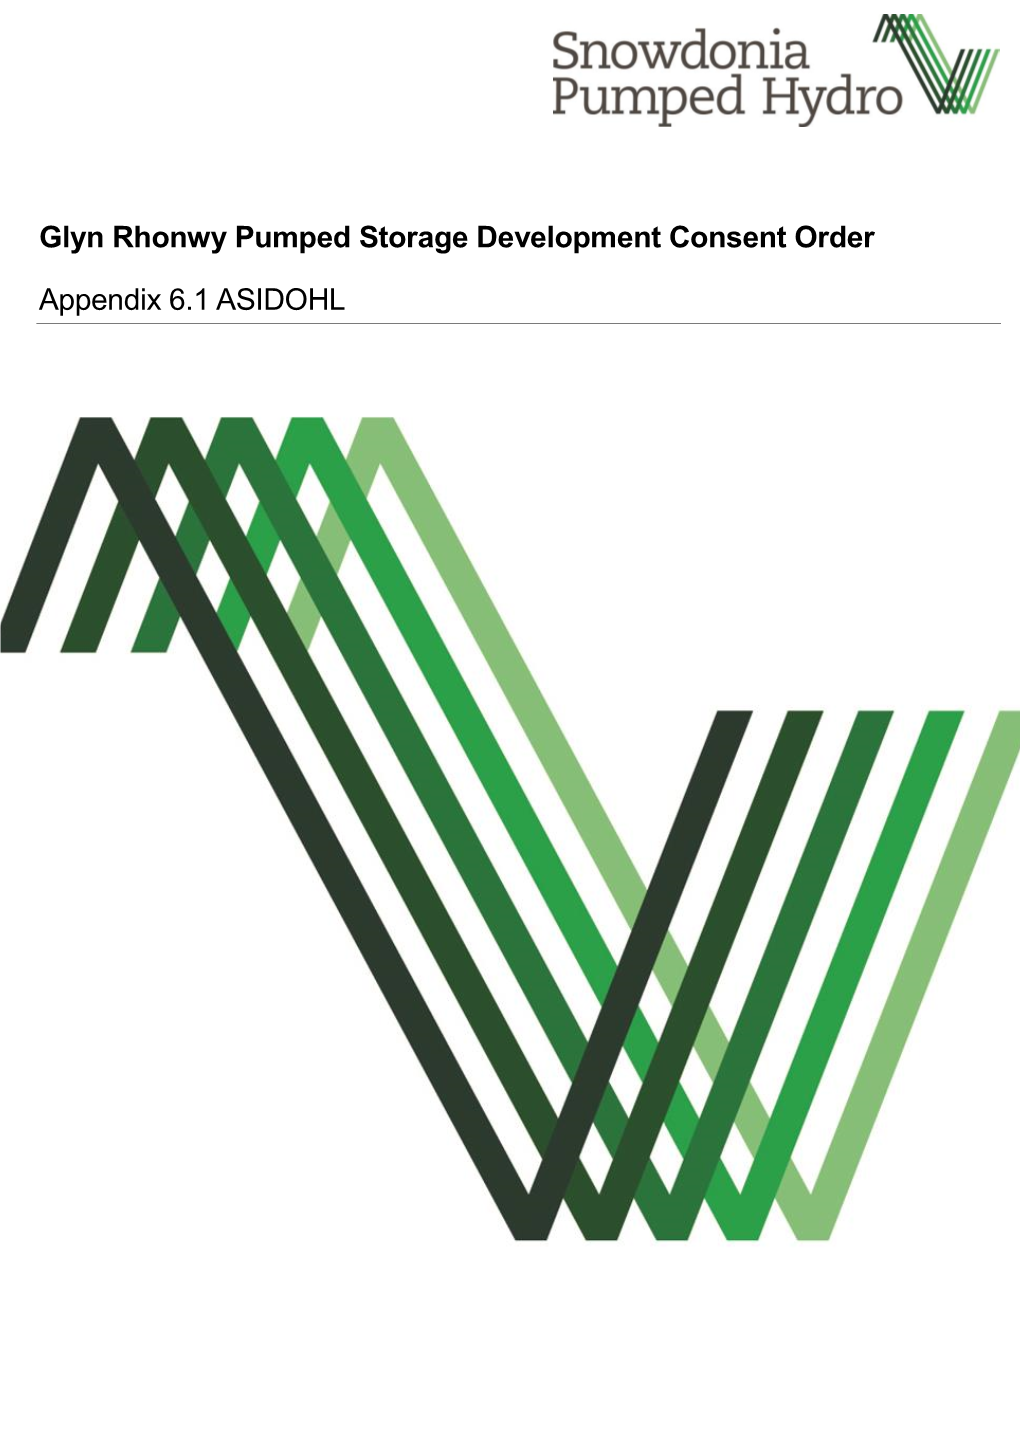 Glyn Rhonwy Pumped Storage Development Consent Order Appendix 6.1 ASIDOHL